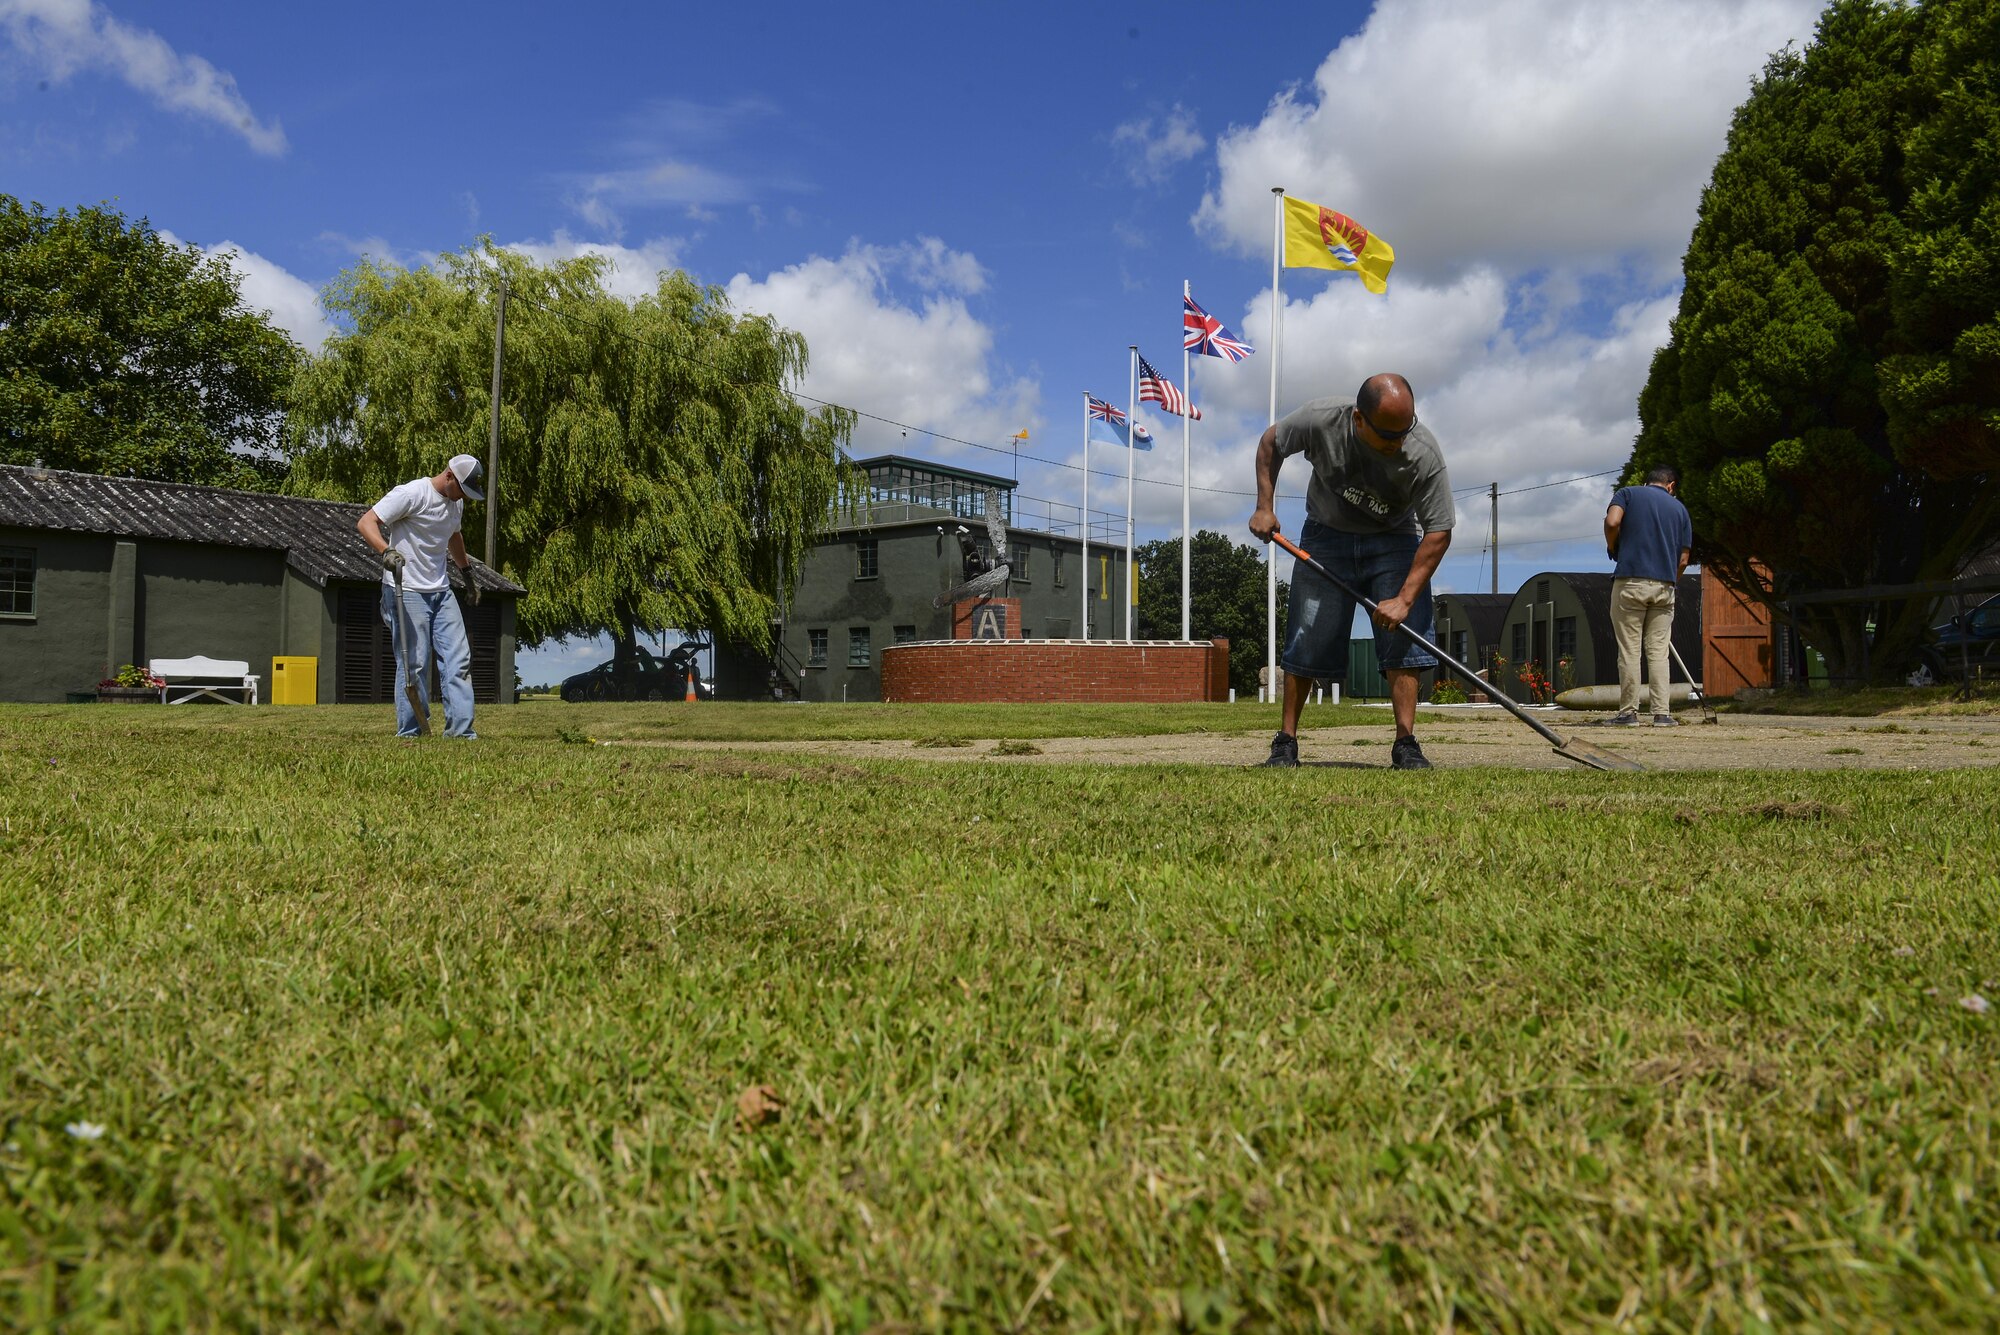 Airmen from Team Mildenhall’s Air Force Sergeants' Association remove weeds from a side walk July 17, 2016, at the RAF Rougham Tower Museum in Bury St. Edmunds, England. During World War II RAF Rougham was home to the U.S. Army Air Force 47th, 322nd, and 94th Bombardment Groups. In 1993 a group of locals banded together to restore and preserve the base after several years of being closed. (U.S. Air Force photo by Staff Sgt. Micaiah Anthony)